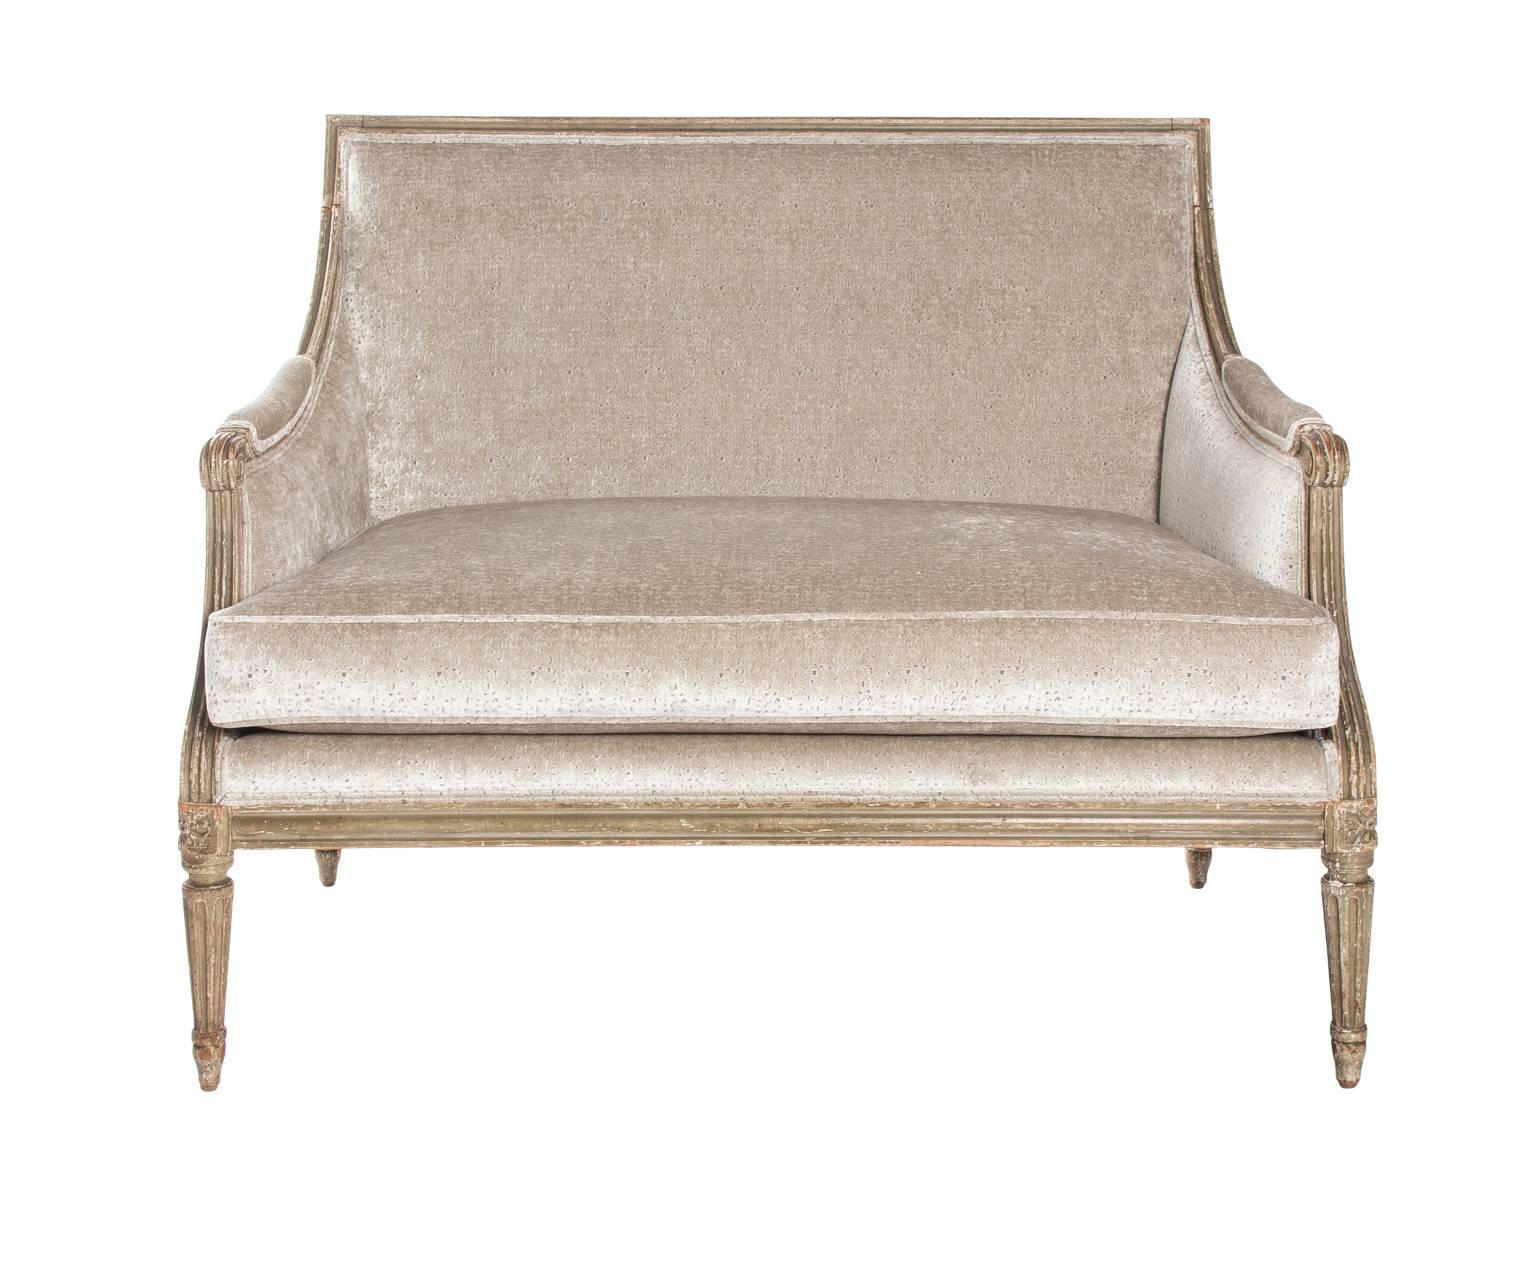 1930s Louis XV style settee with newly upholstered velvet fabric.
 